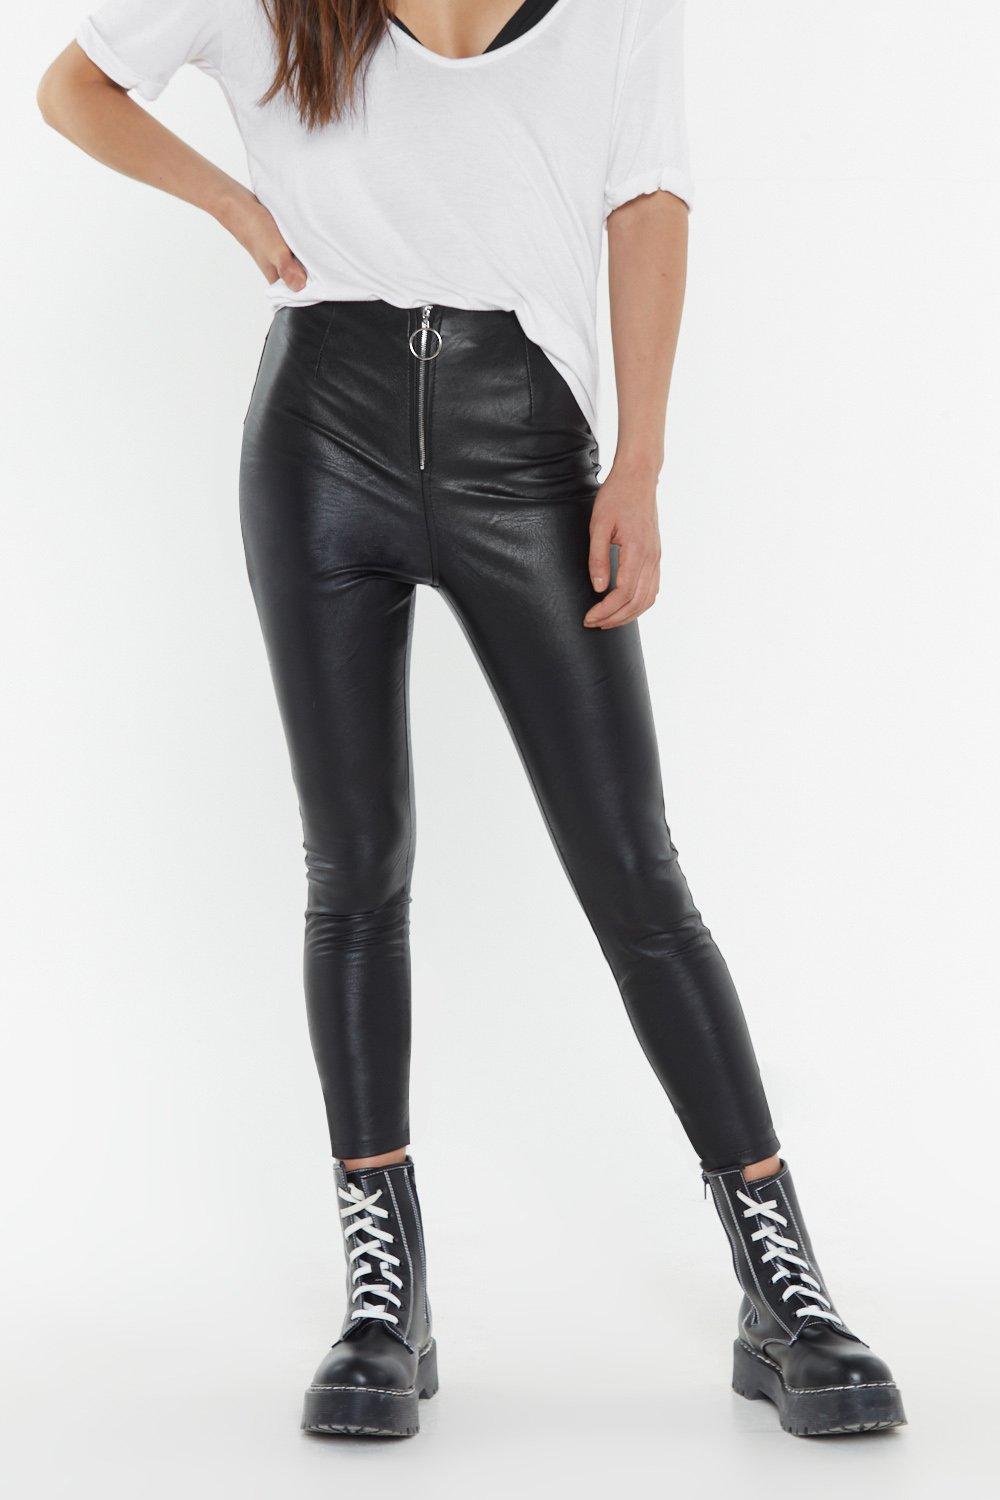 real leather pants